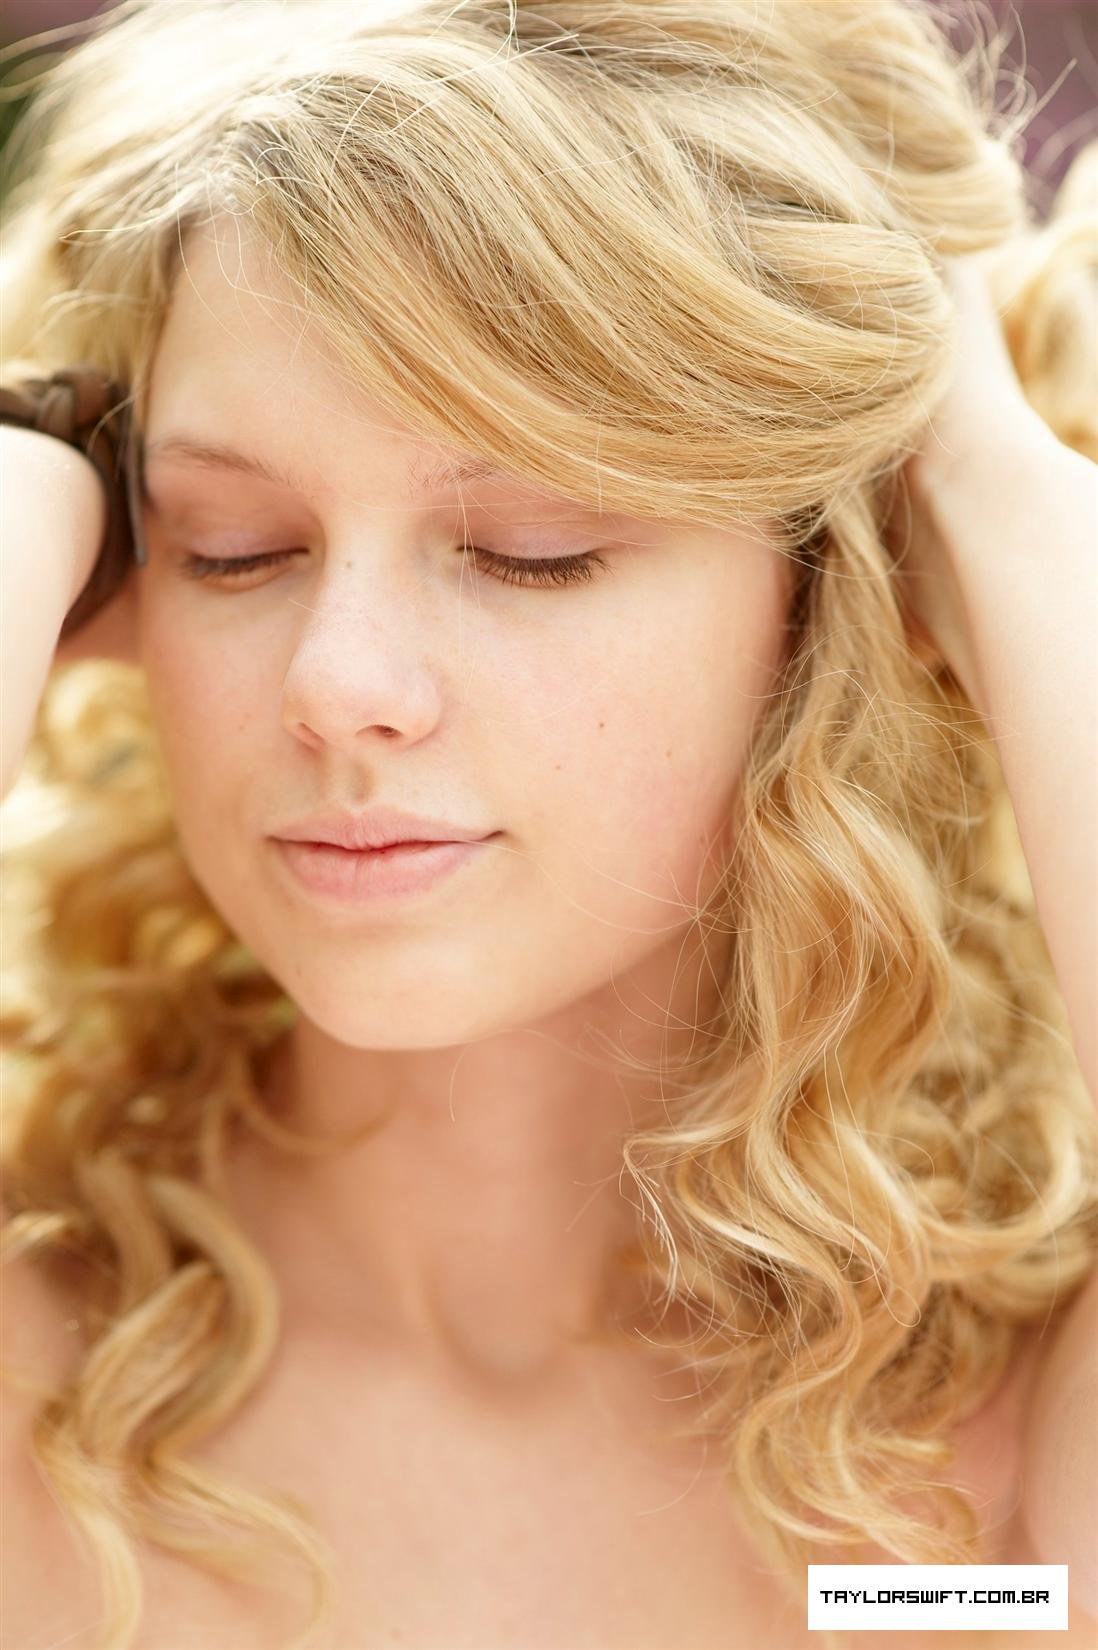 Taylor Swift with no makeup picture 8 of 12